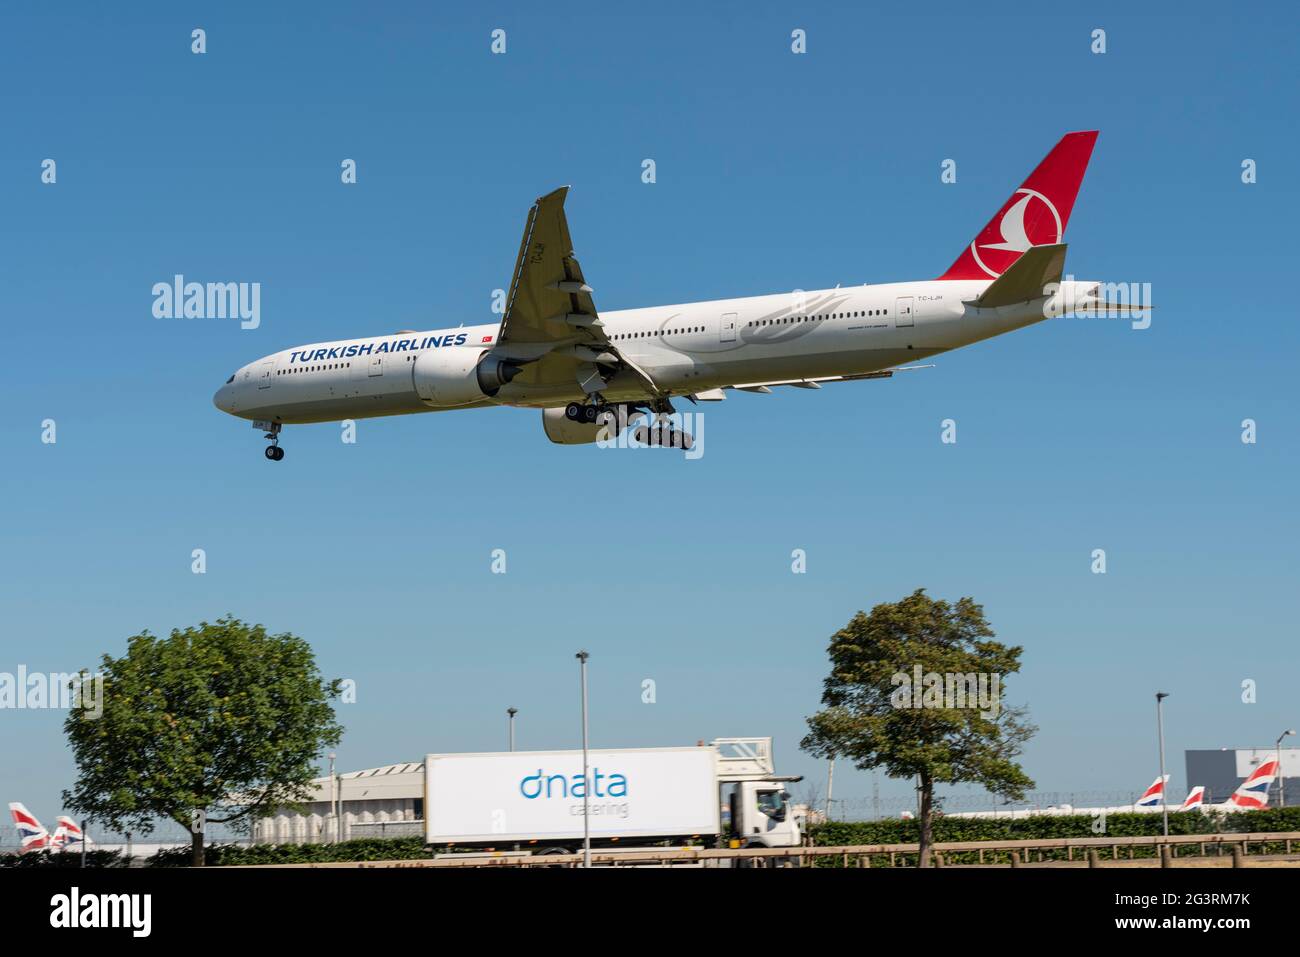 Turkish Airlines Boeing 777 airliner jet plane TC-LJH  on finals to land at London Heathrow Airport, UK, over A30 road and catering business lorry Stock Photo